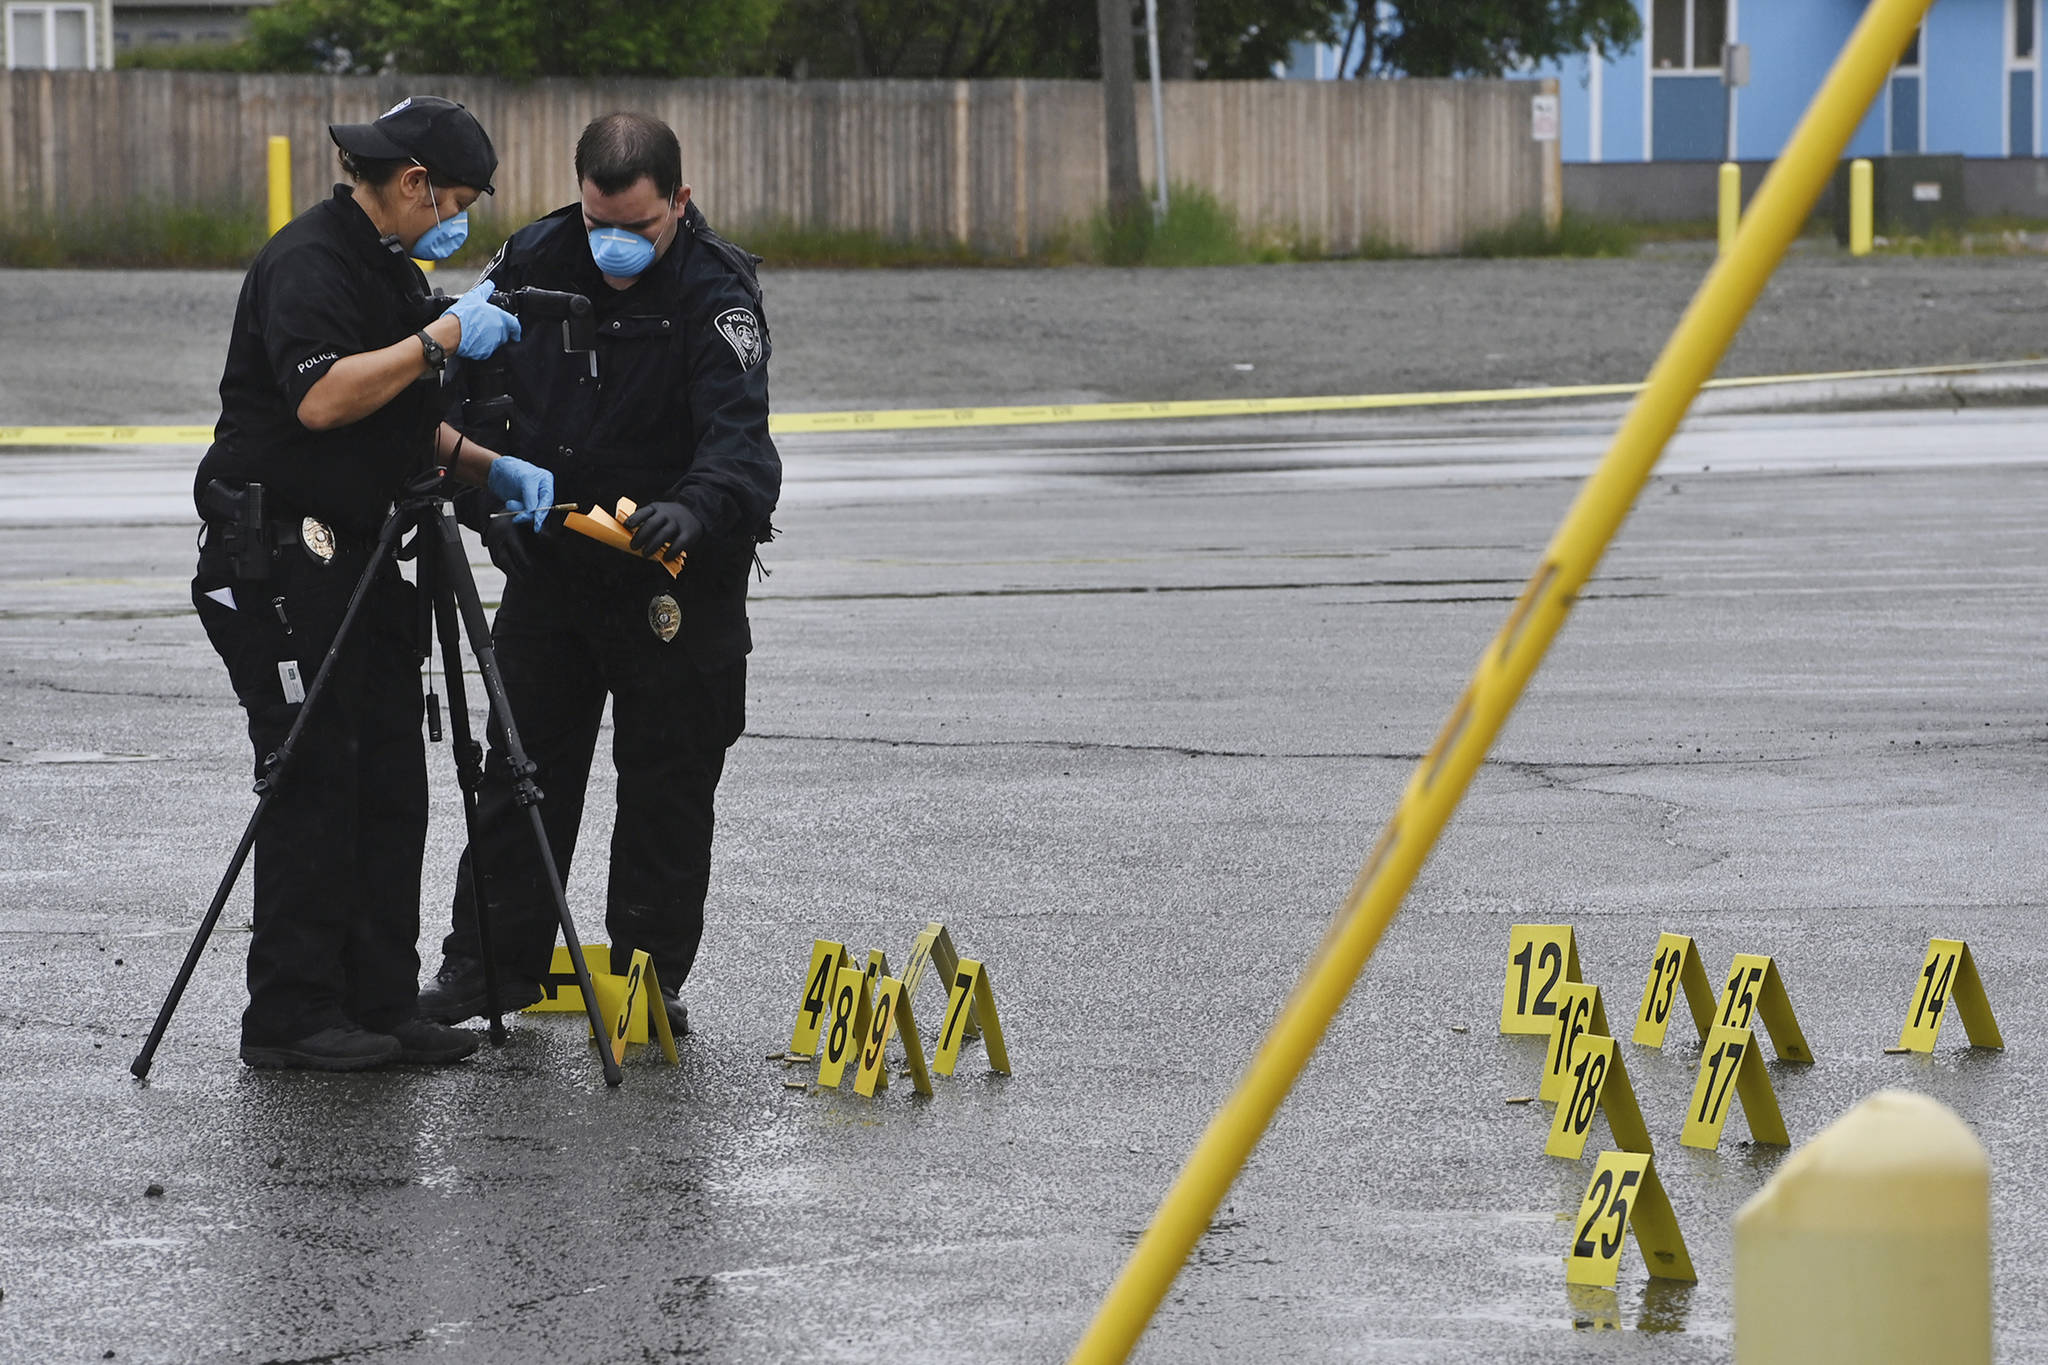 Police investigate the scene of an early morning fatal shooting along Gambell Street between Fourth Avenue and Fifth Avenue near downtown Anchorage, Alaska, Saturday, June 19, 2021. (Bill Roth / Anchorage Daily News)